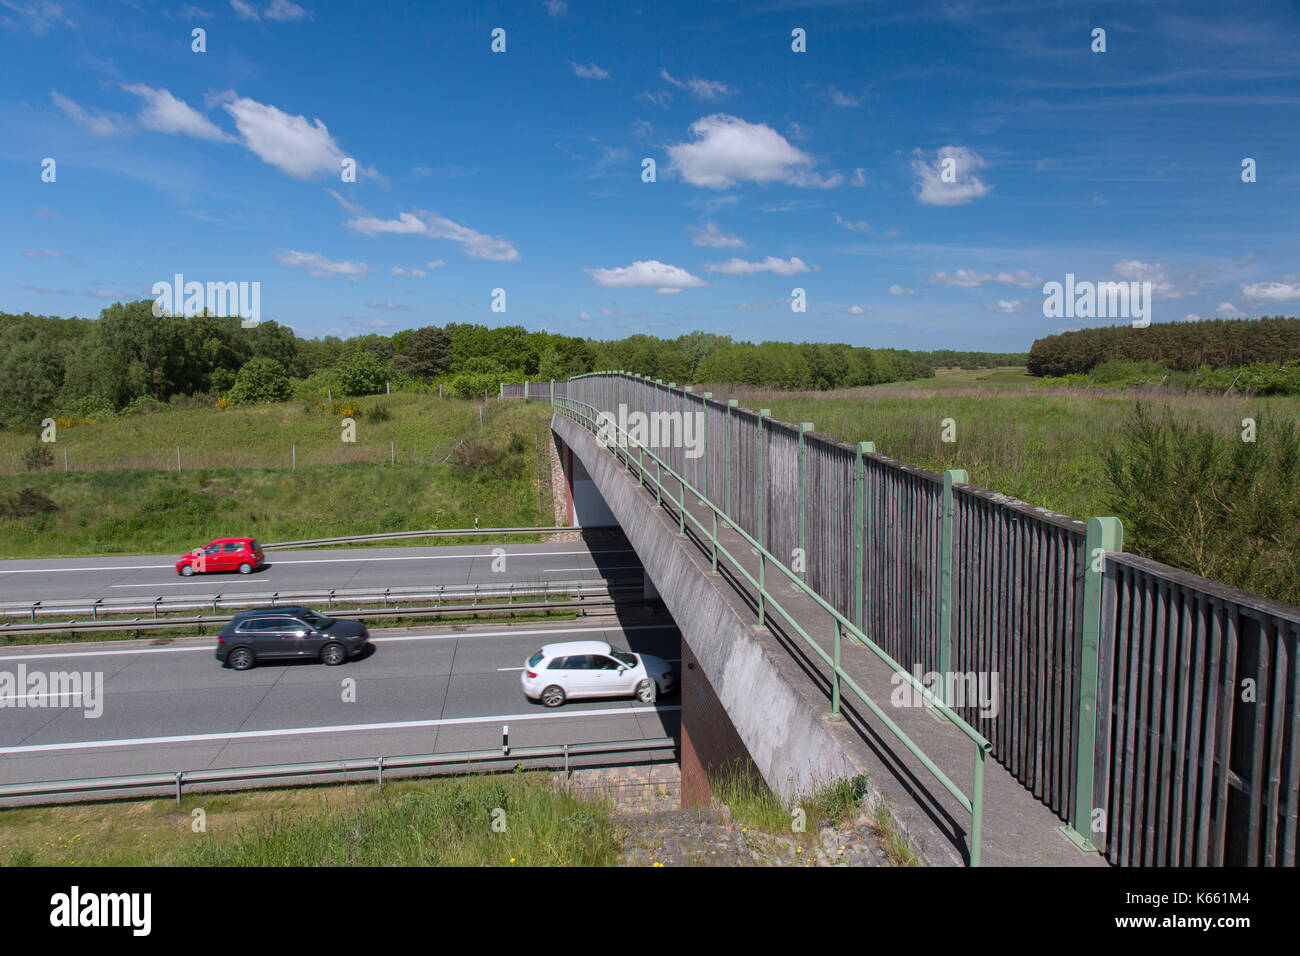 Wildlife bridge / animals overpass / wildlife crossing  / ecoduct over highway connecting animal habitats and avoiding collisions with vehicles Stock Photo